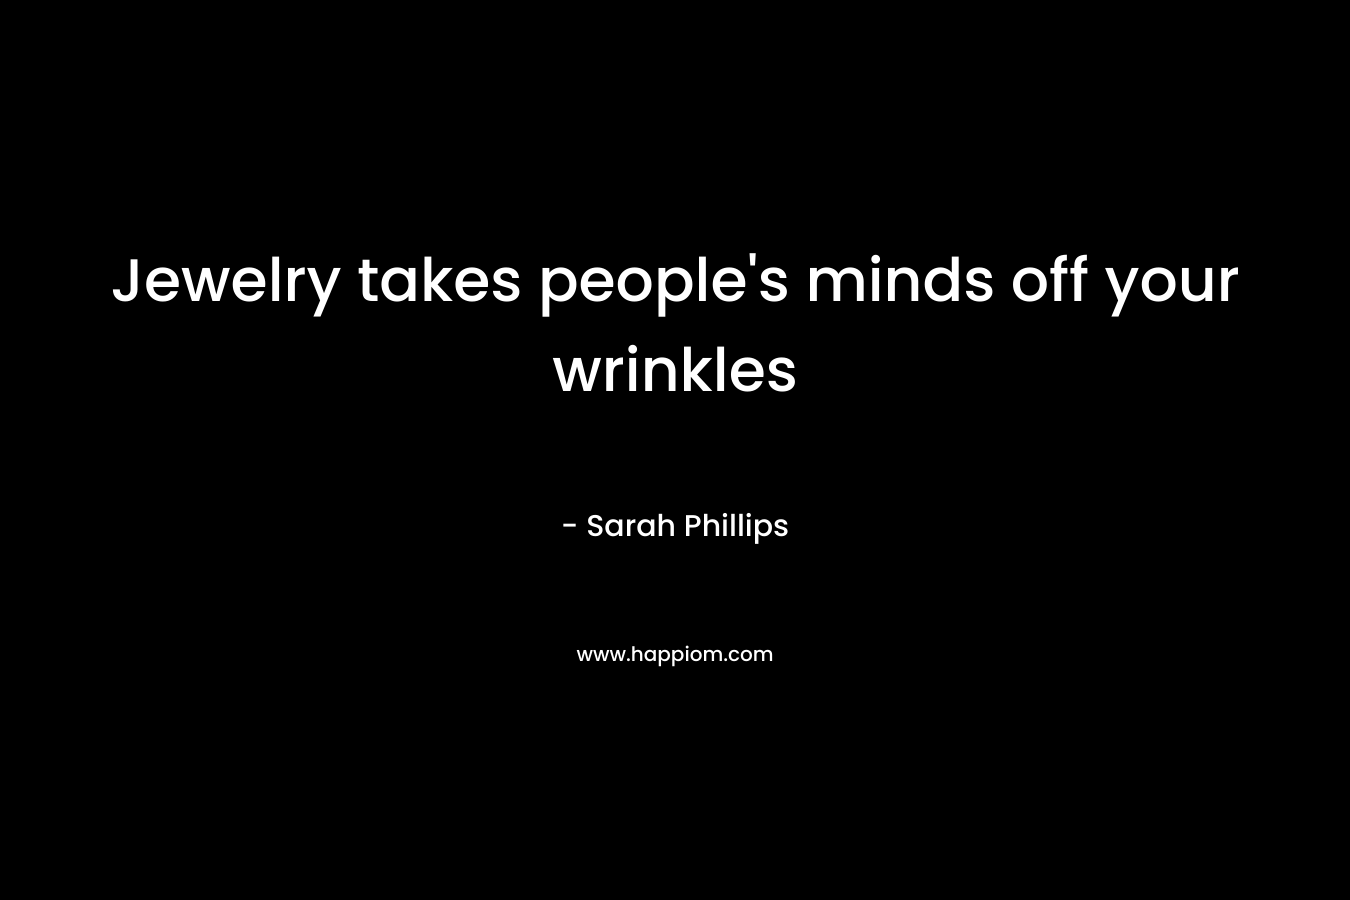 Jewelry takes people's minds off your wrinkles